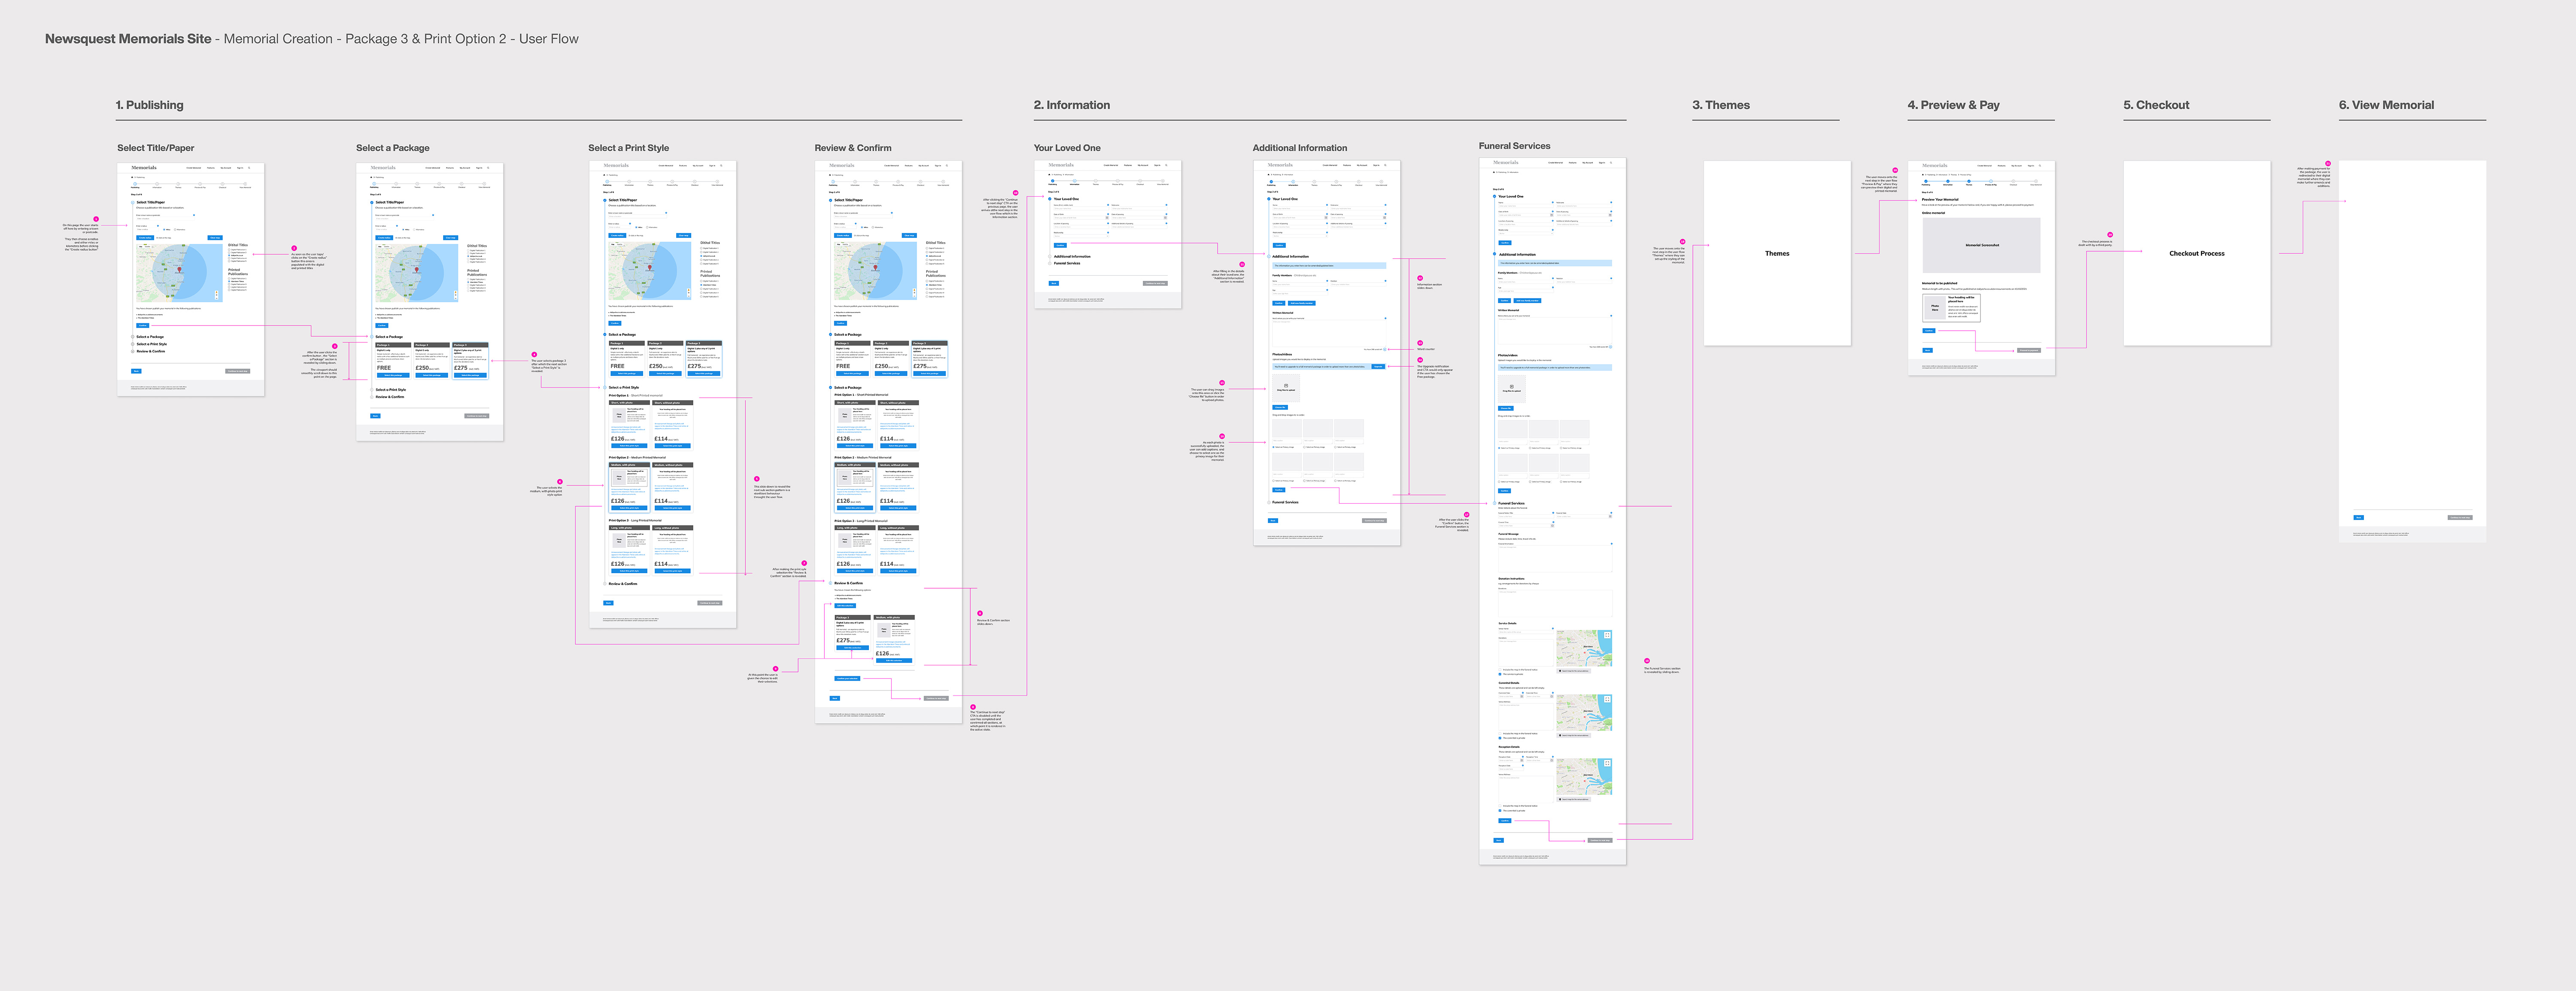 An image of the mid-fidelity wireframes as a user flow